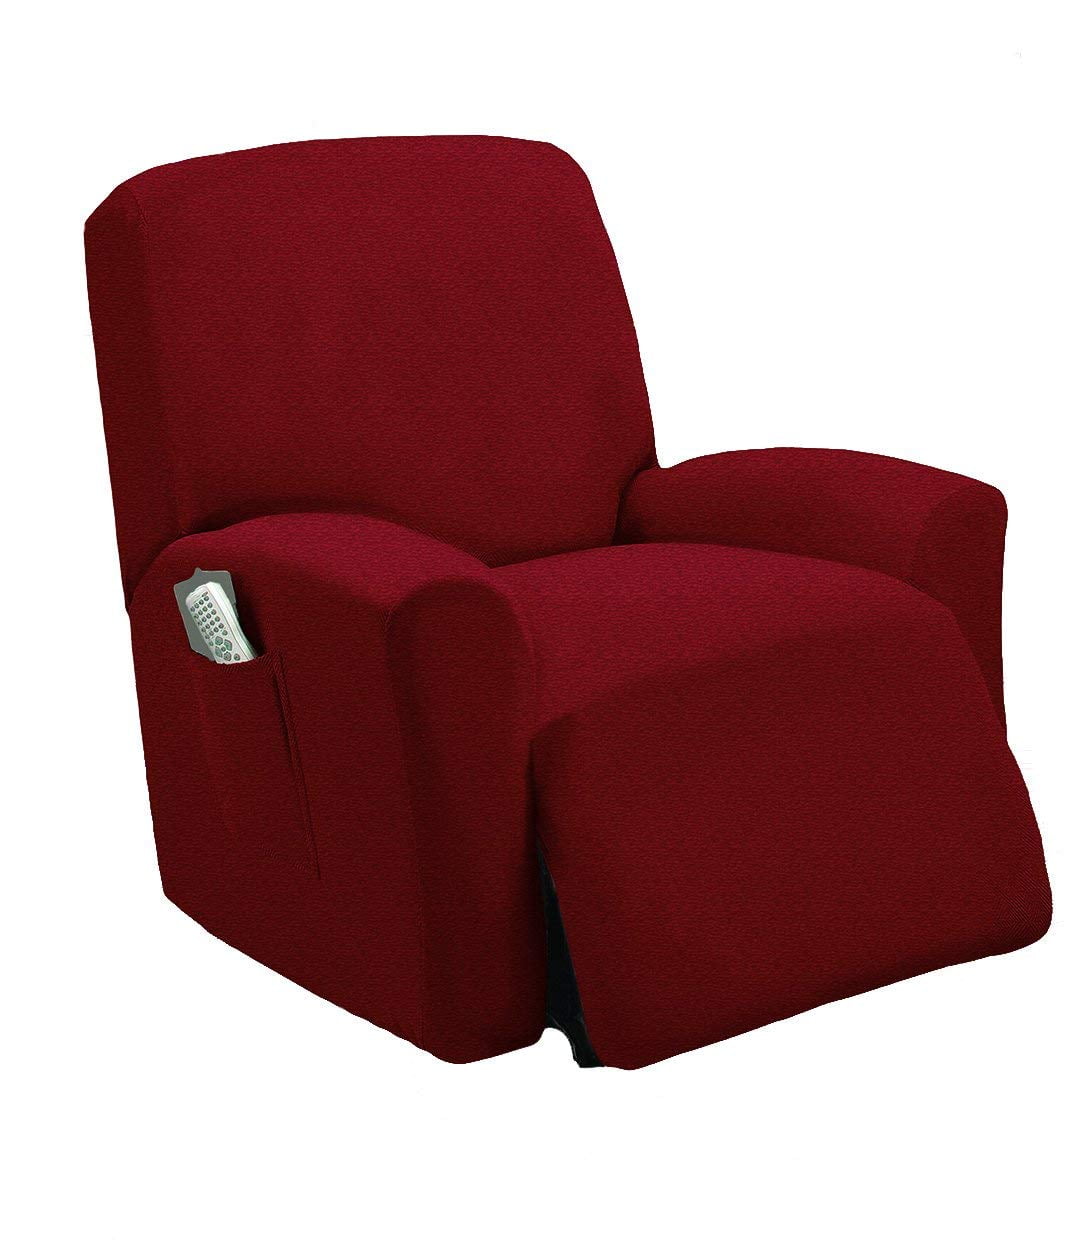 Stretch Form Chair Cover Slipcover Fit Furniture Protect Recliner Lazy Soft 